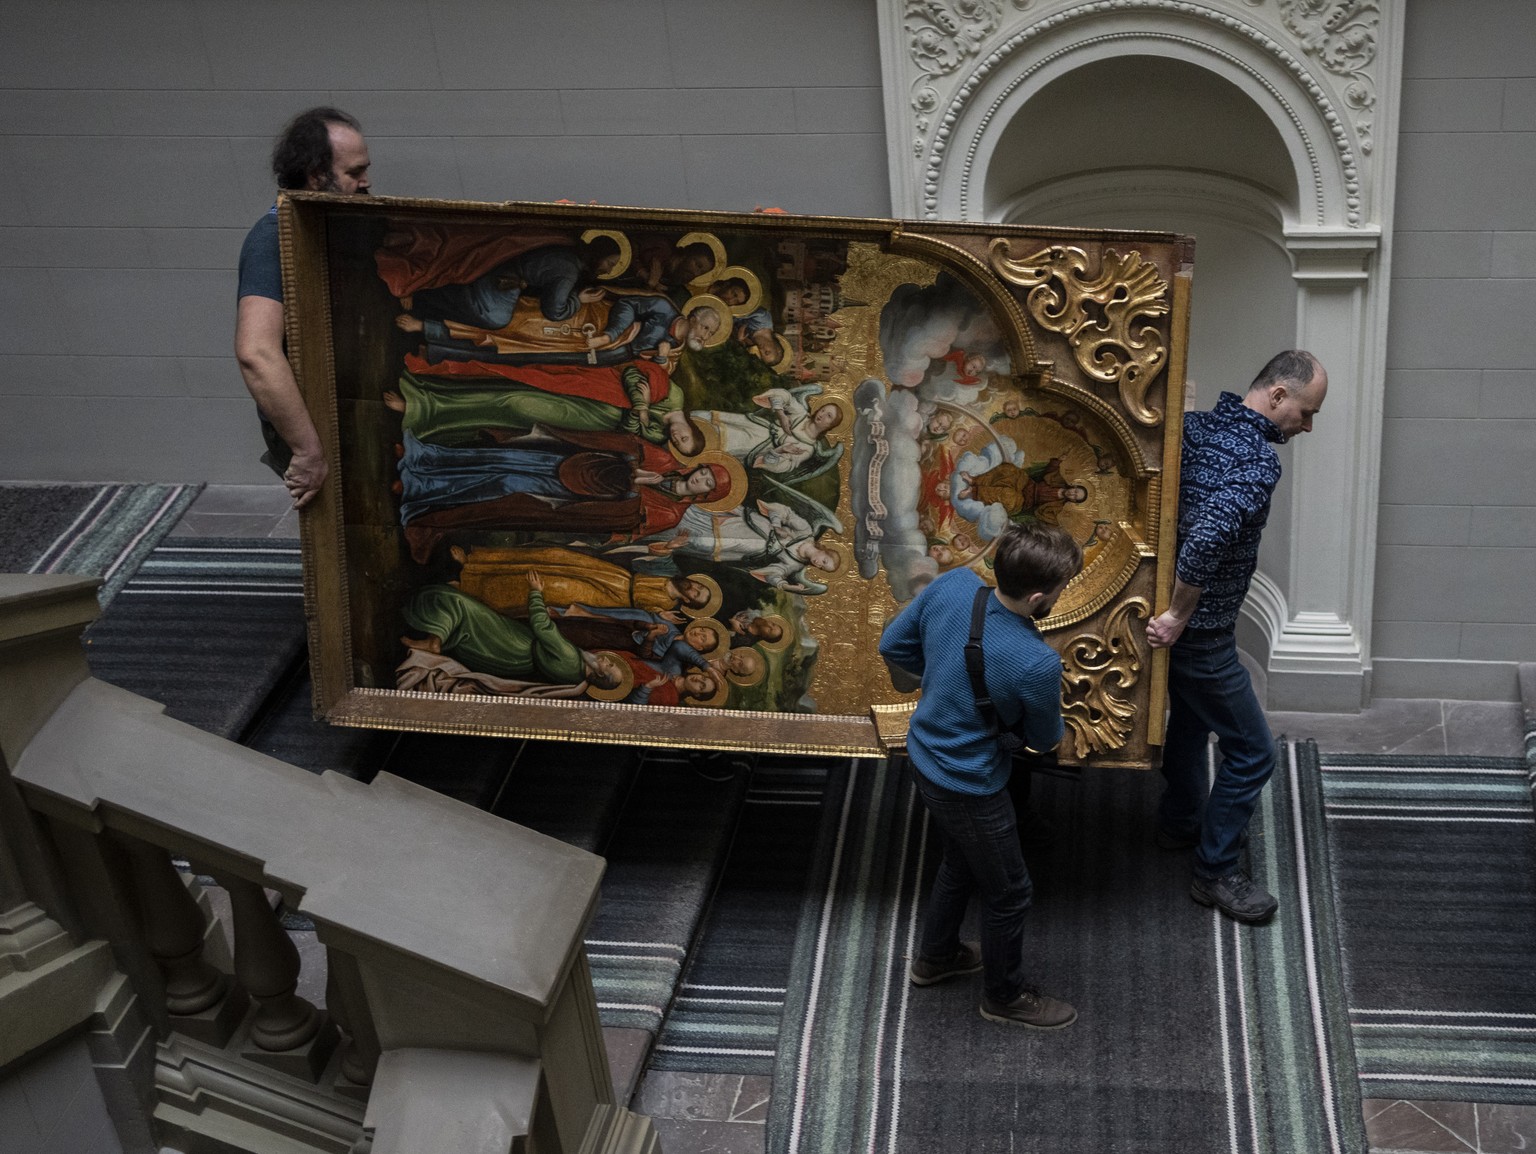 Workers move the Annunciation to the Blessed Virgin of the Bohorodchany Iconostasis in the Andrey Sheptytsky National Museum as part of safety preparations in the event of an attack in the western Ukr ...